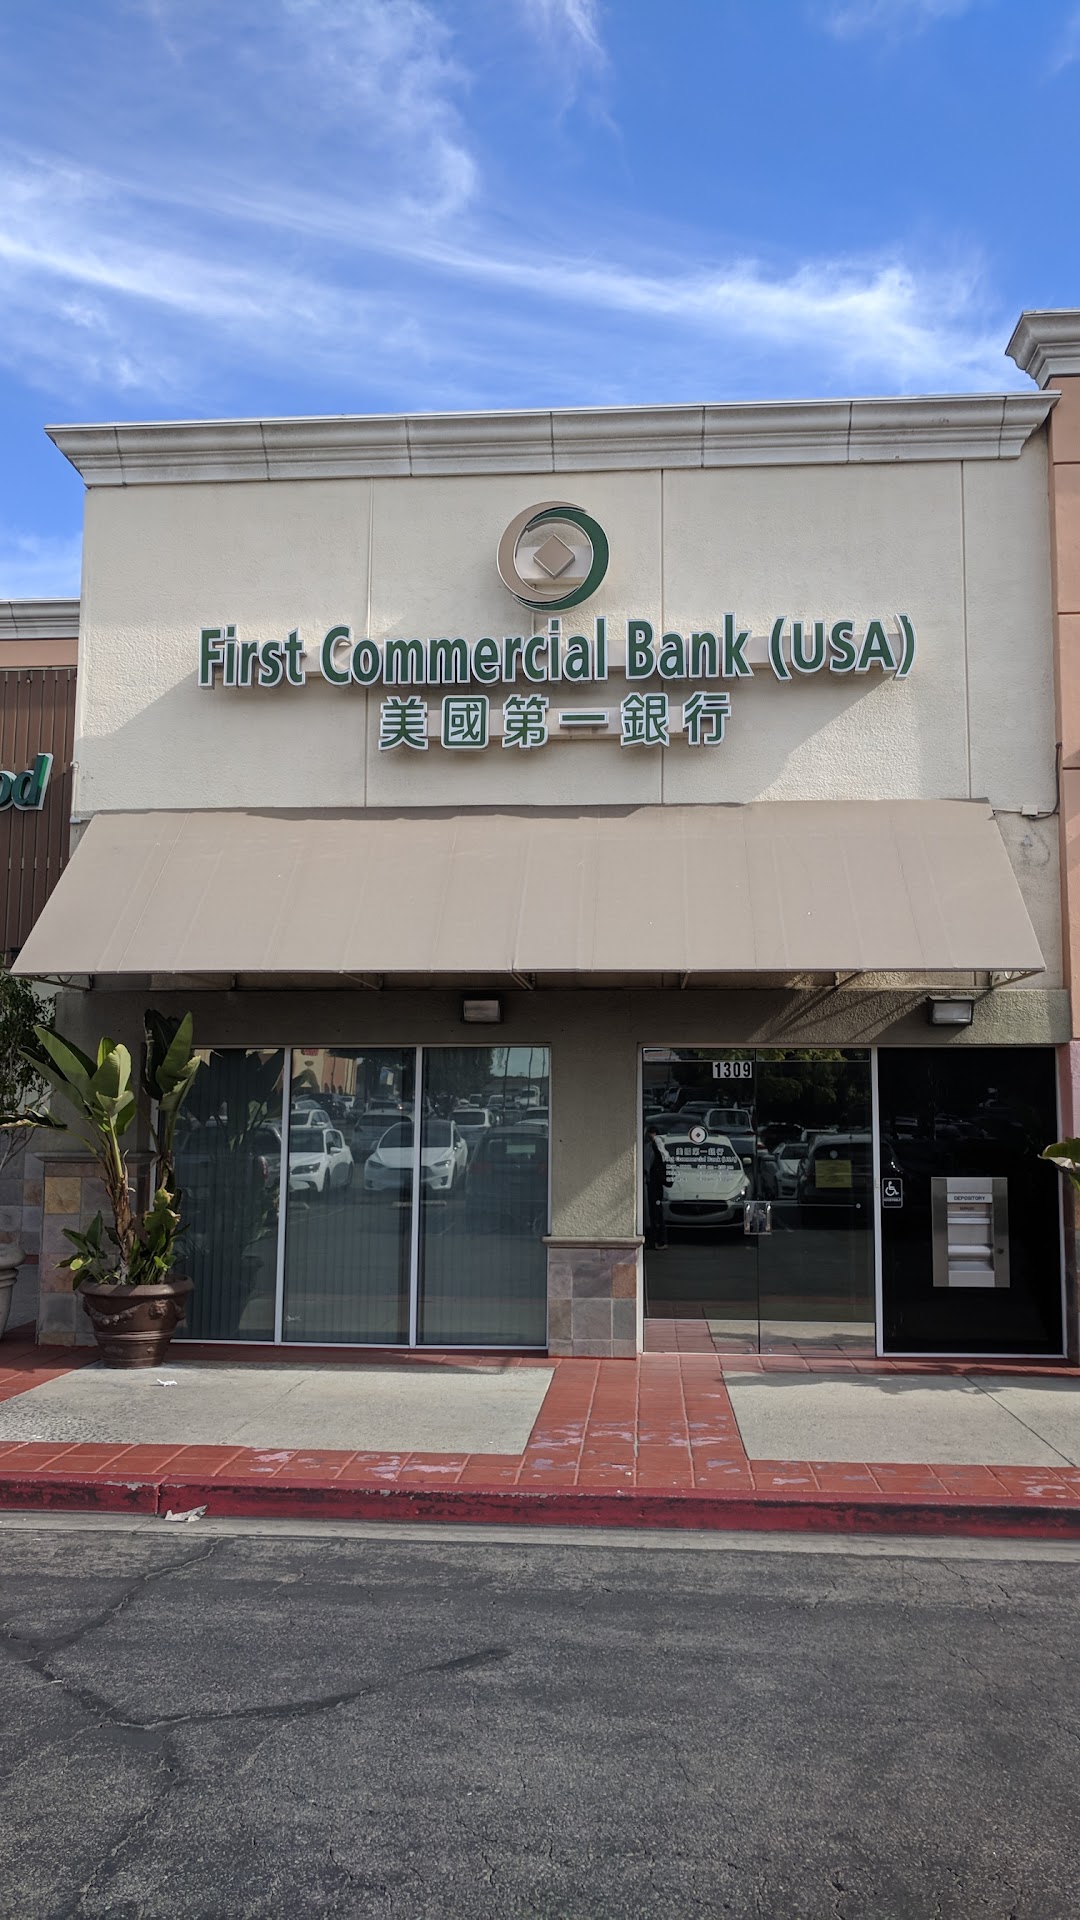 First Commercial Bank (USA)